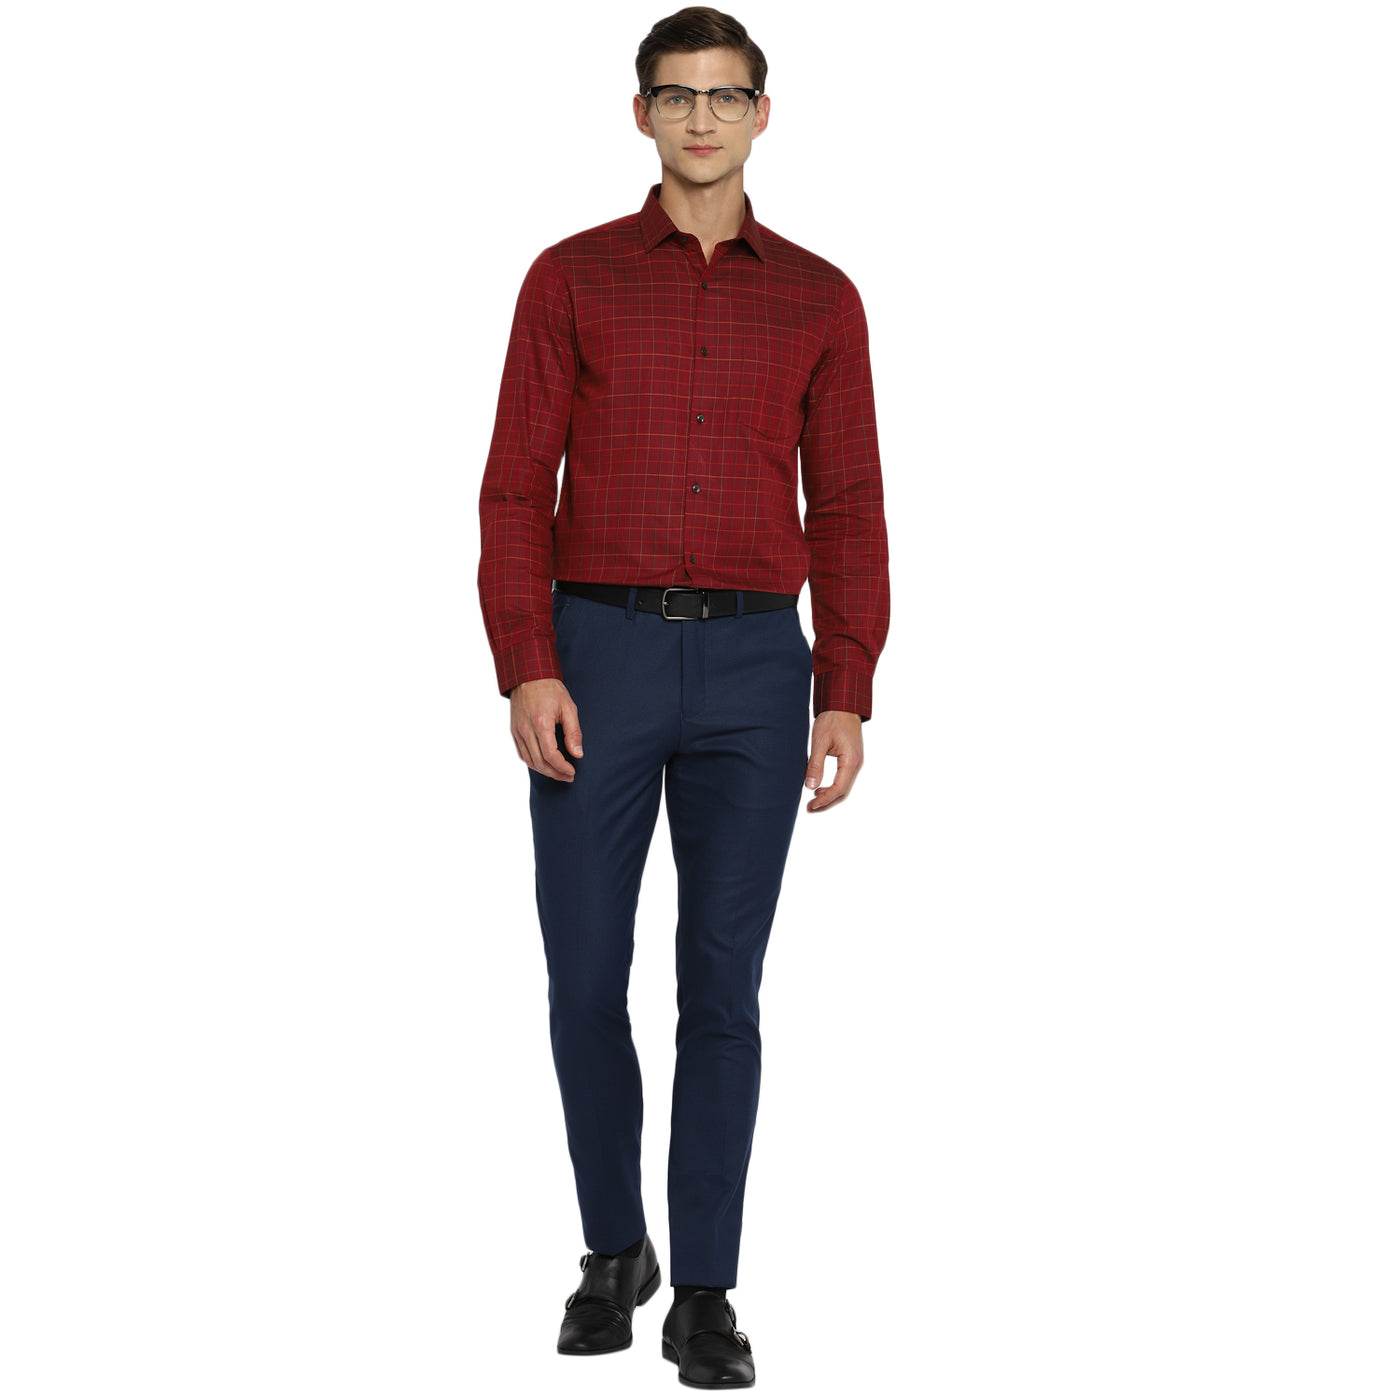 Maroon Cotton Checked Slim Fit Shirts